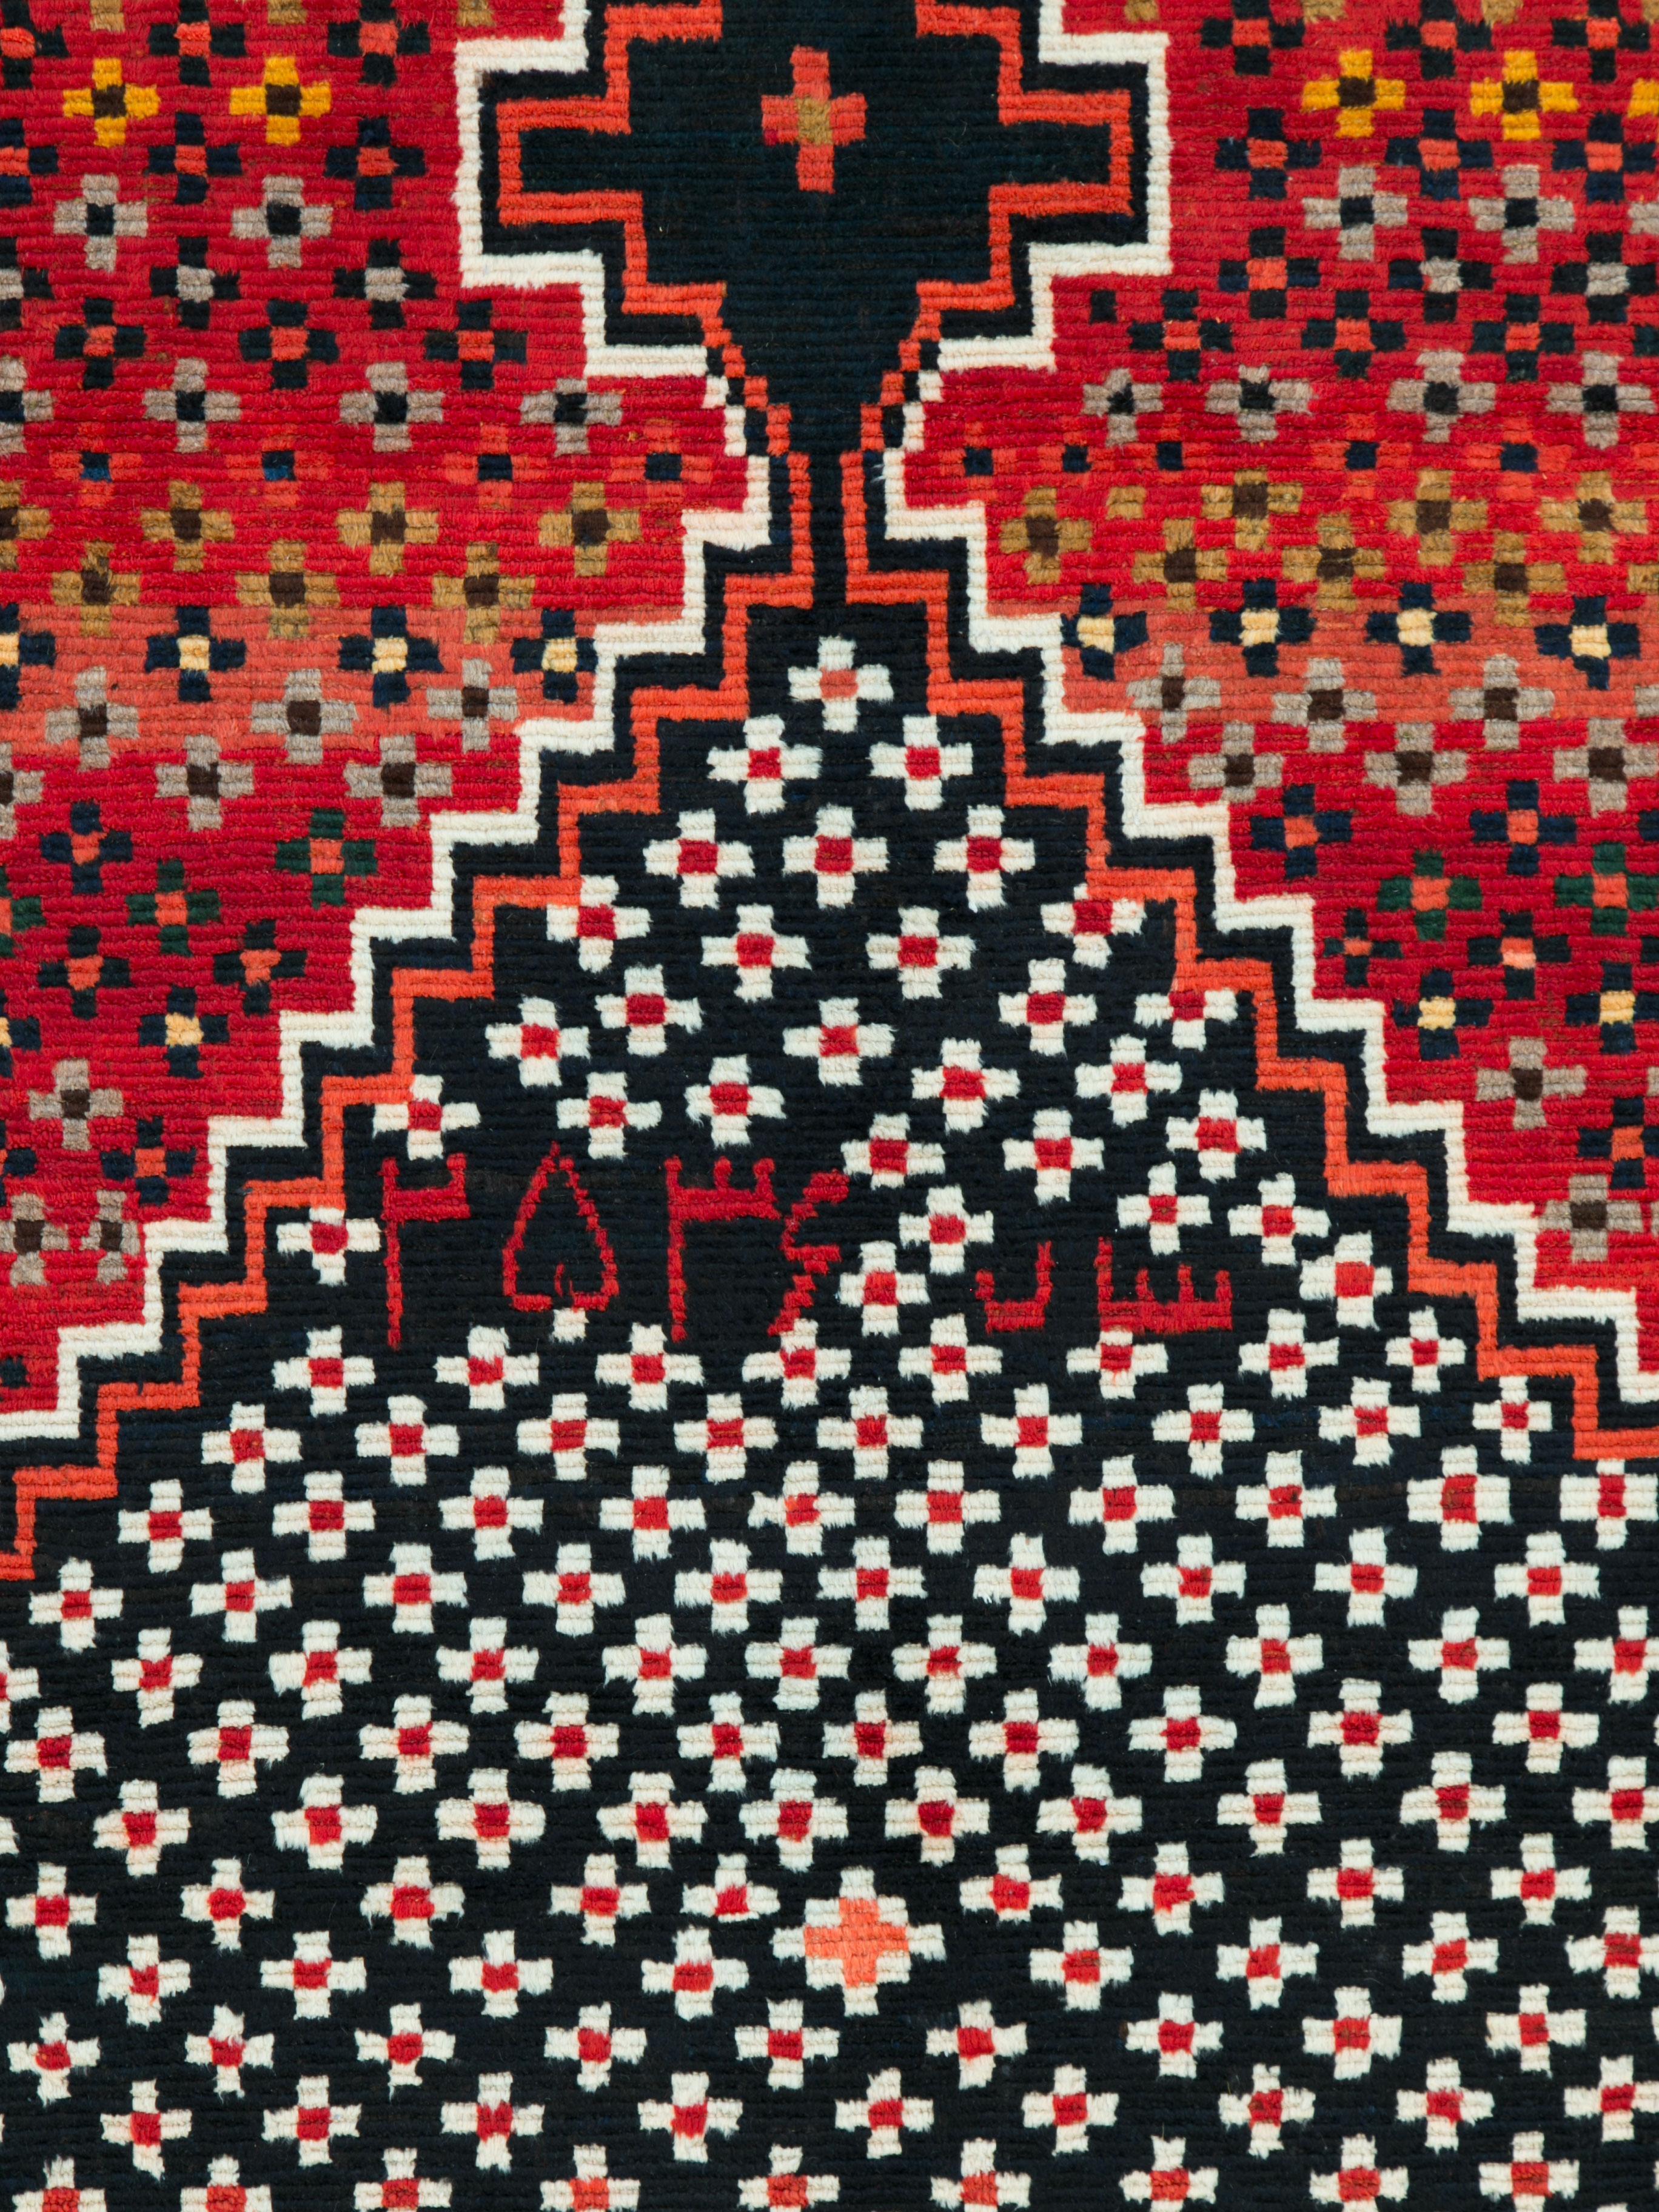 A vintage Persian Gabbeh rug woven by the nomadic Qashqai tribe. This is definitely a conversational piece and one created for an artsy individual that can enjoy the quirkiness of vintage tribal rugs. Aside from the offset medallion and highly